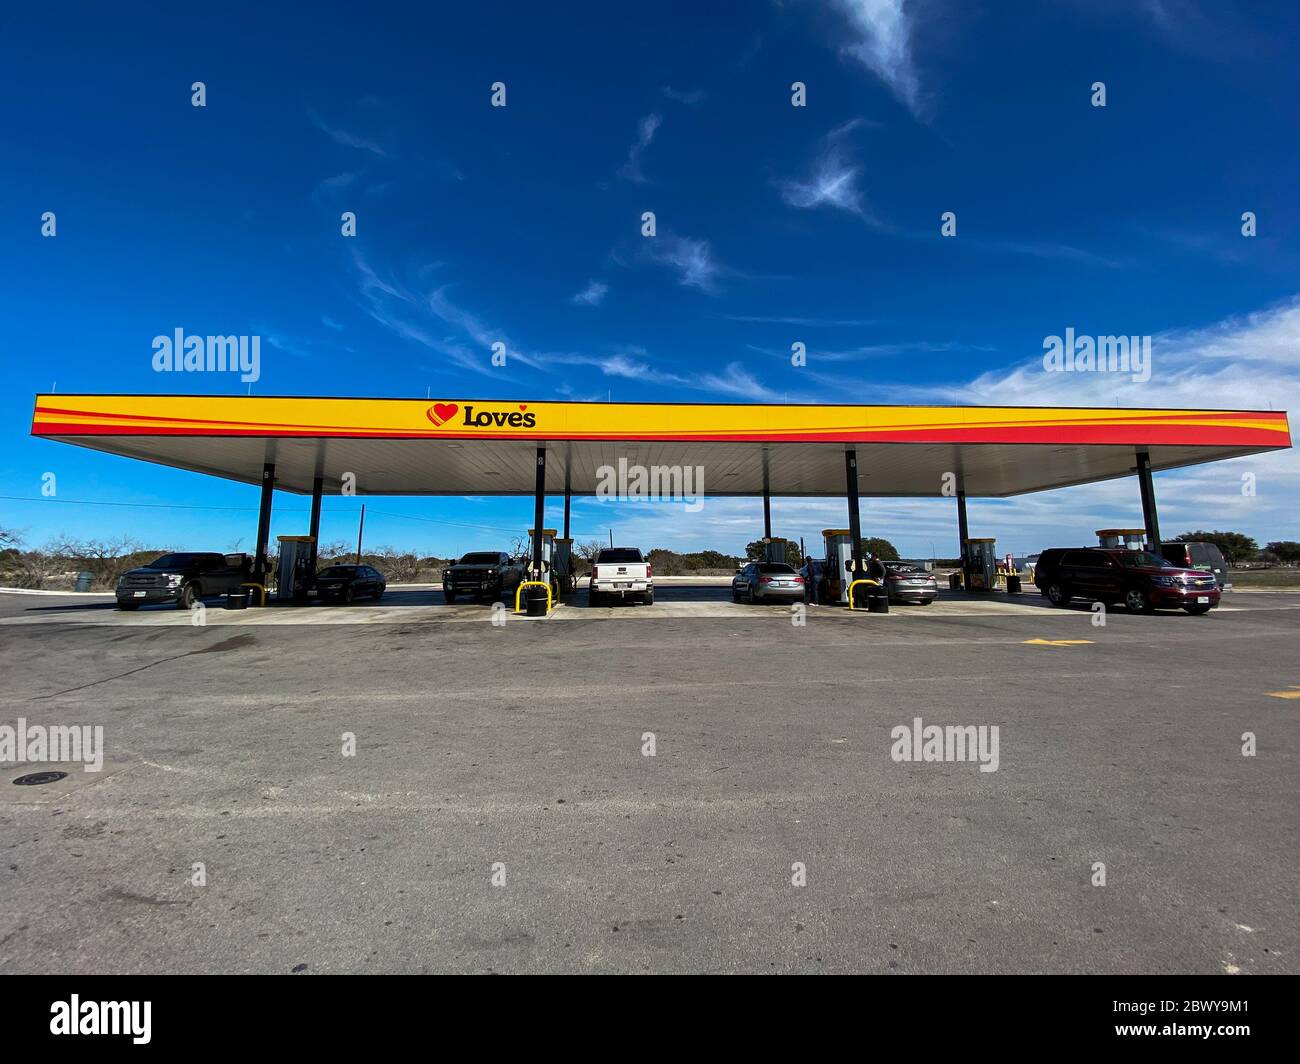 Sonora, TX/USA - 24.20: A Love's Truck Stop Gas Station in Sonora, Texas. Stockfoto